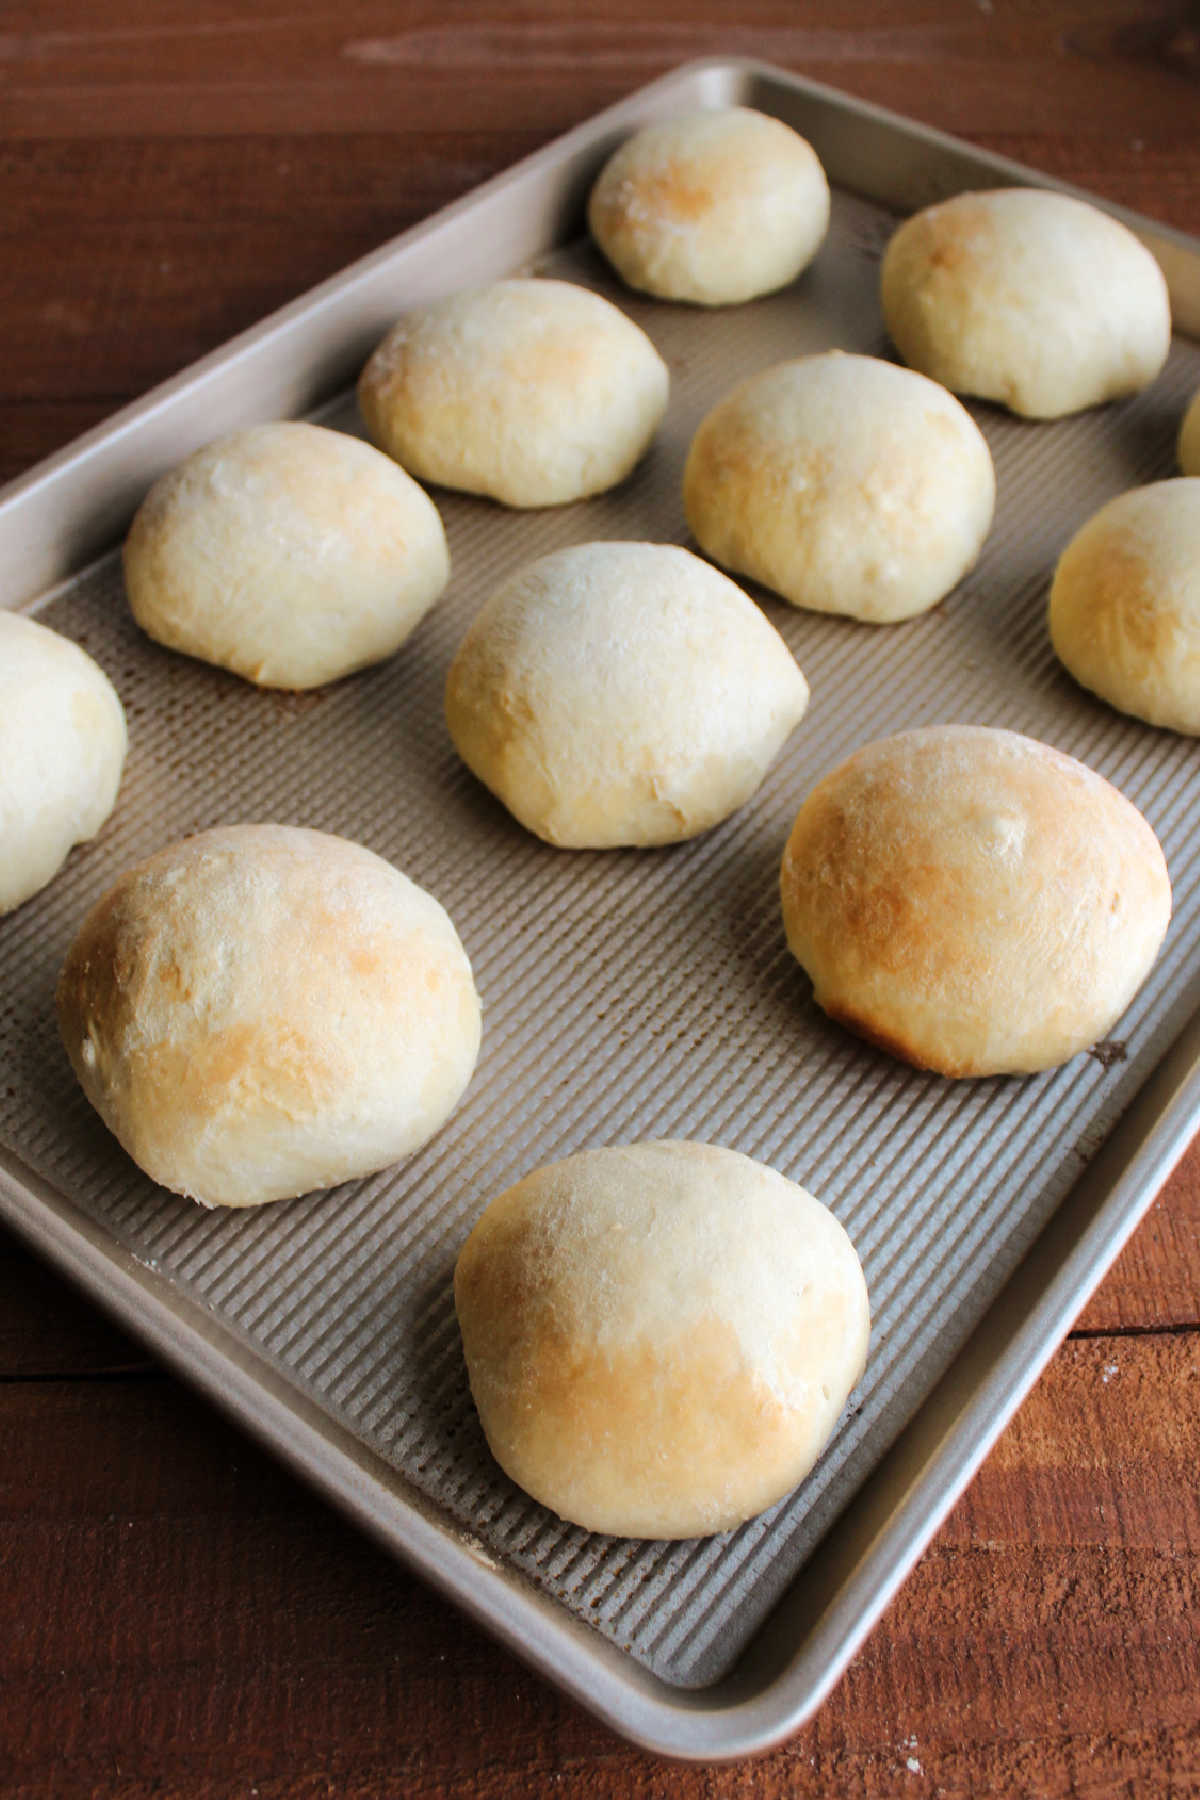 Freshly baked rolls with light golden brown tops on sheet pan.